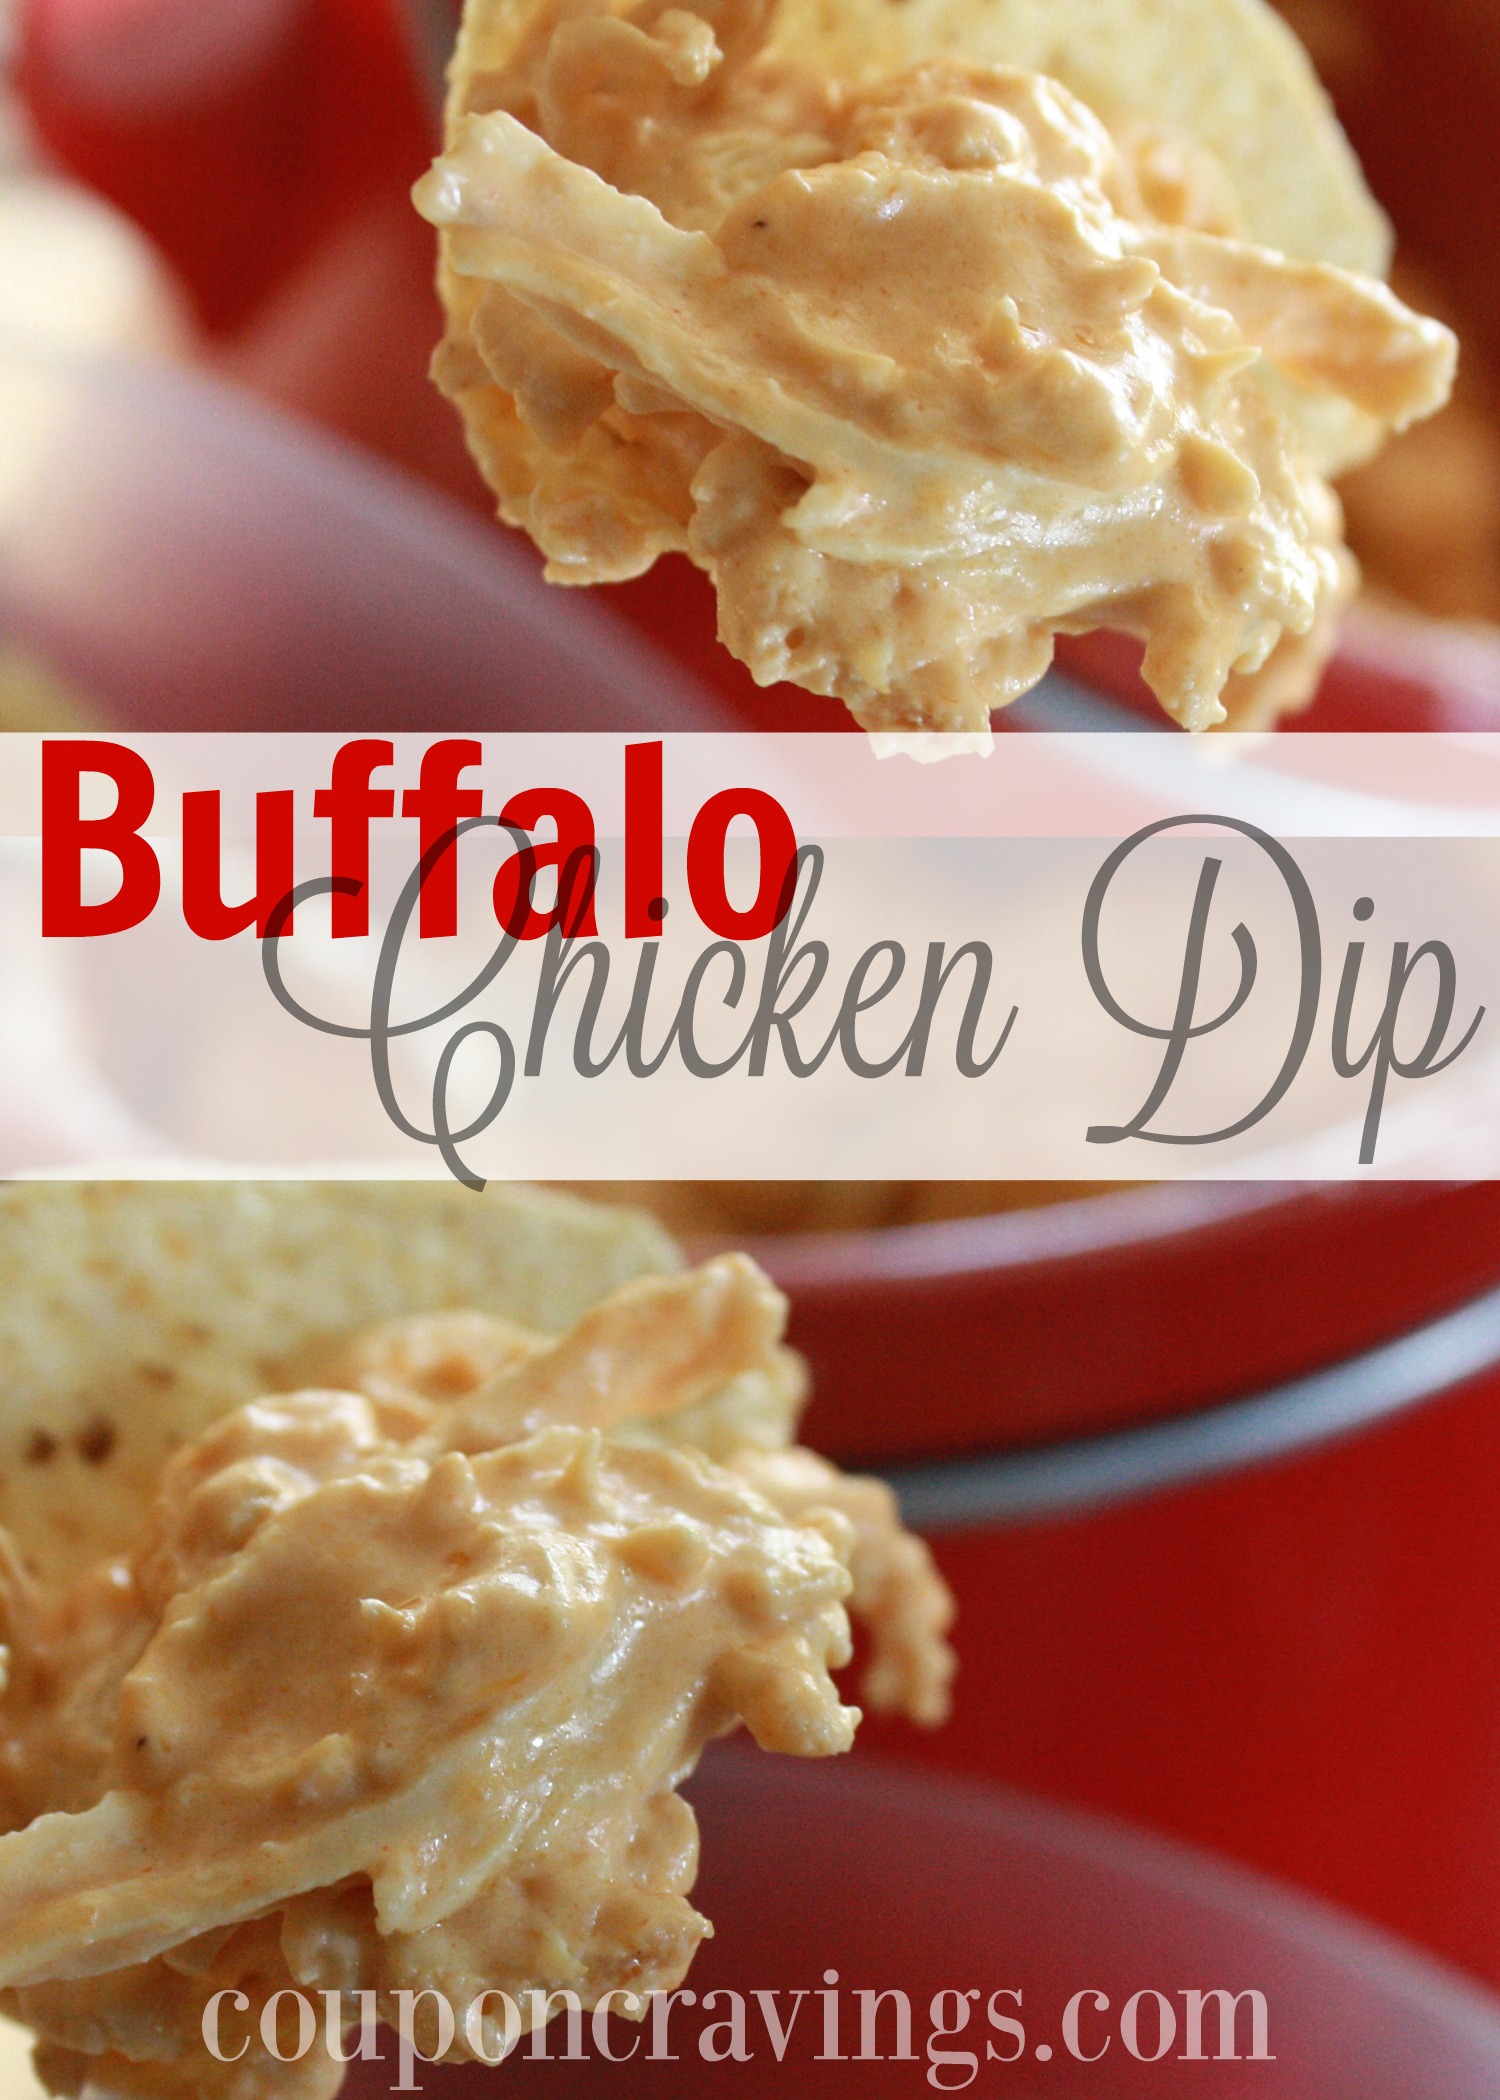 This buffalo chicken dip crock pot recipe is one of our all-time favorite appetizer recipes. This is an easy appetizer that can be thrown together in no time at all to feed a crowd on a budget. If you’re on the hunt for chicken appetizers, crockpot ones especially.. this is it!